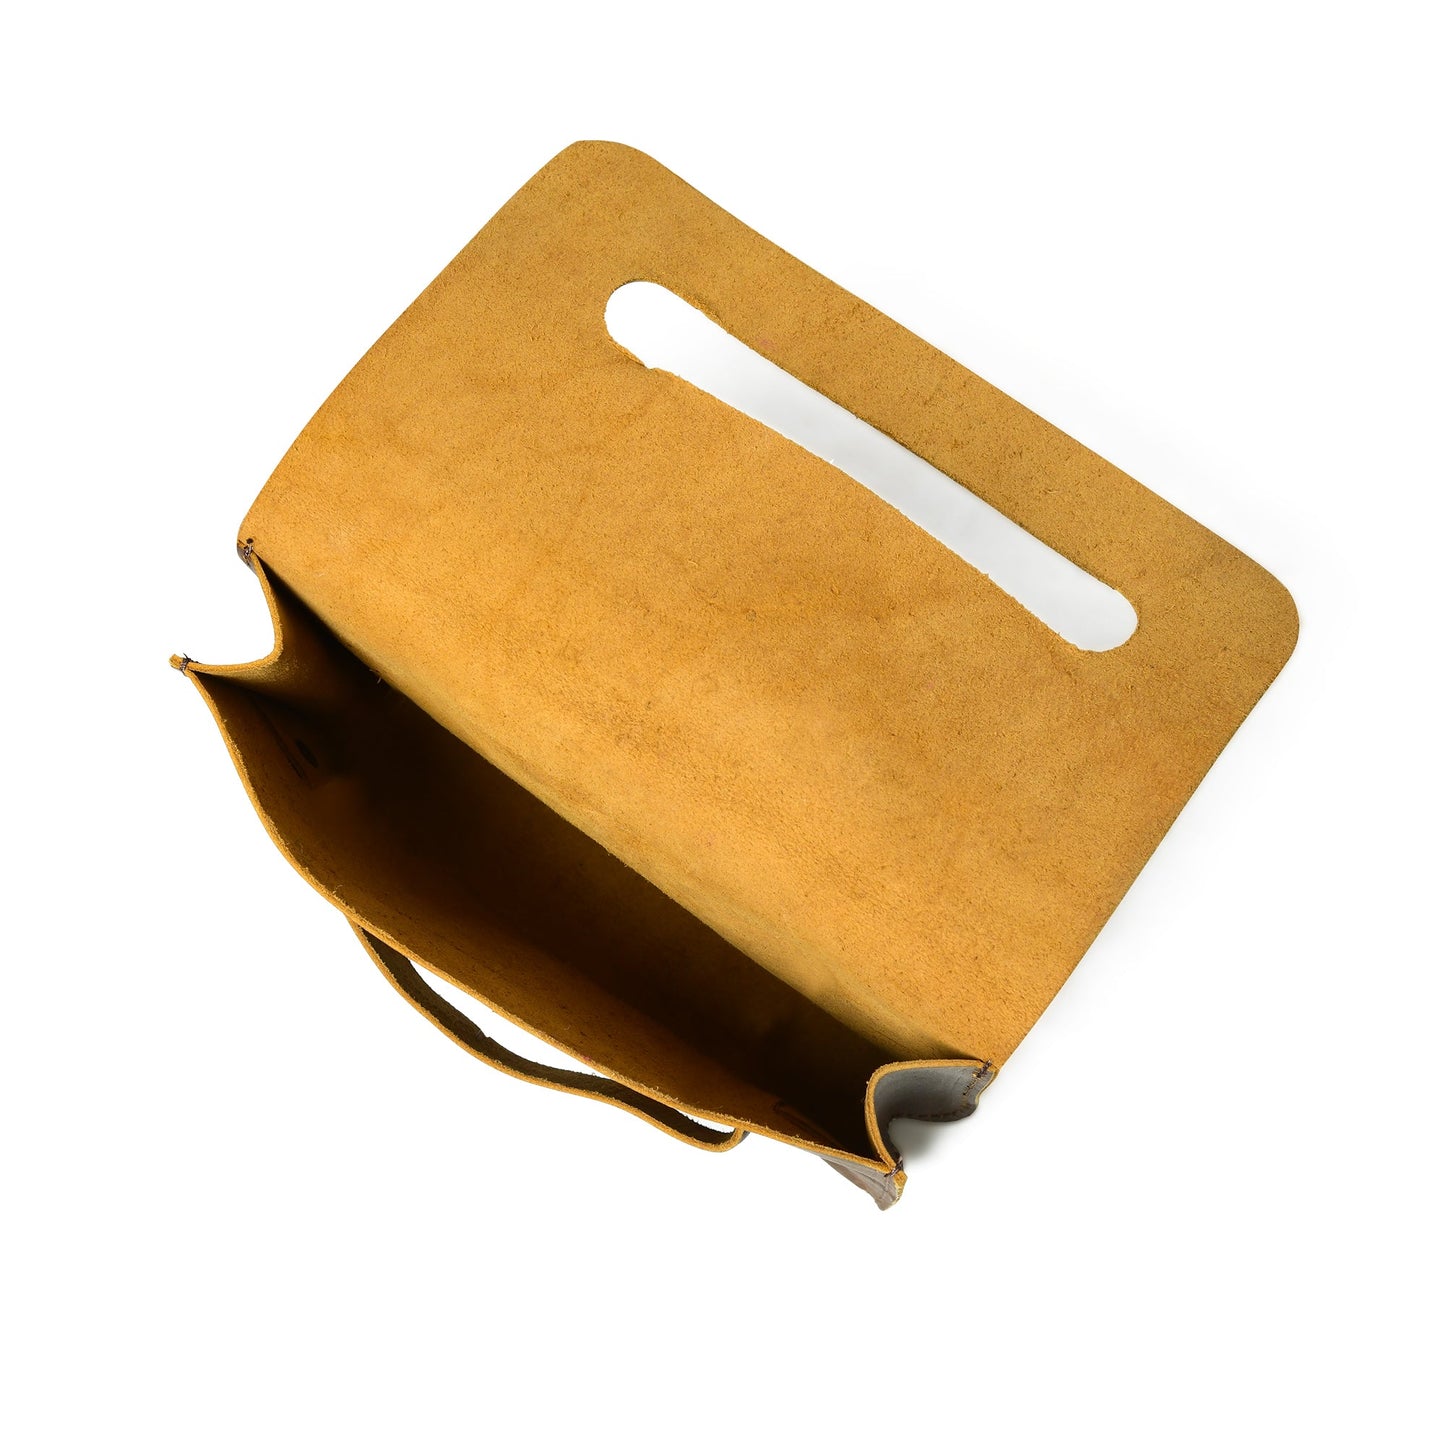 Chic Cocoa Leather Women's Clutch - The Tool Store